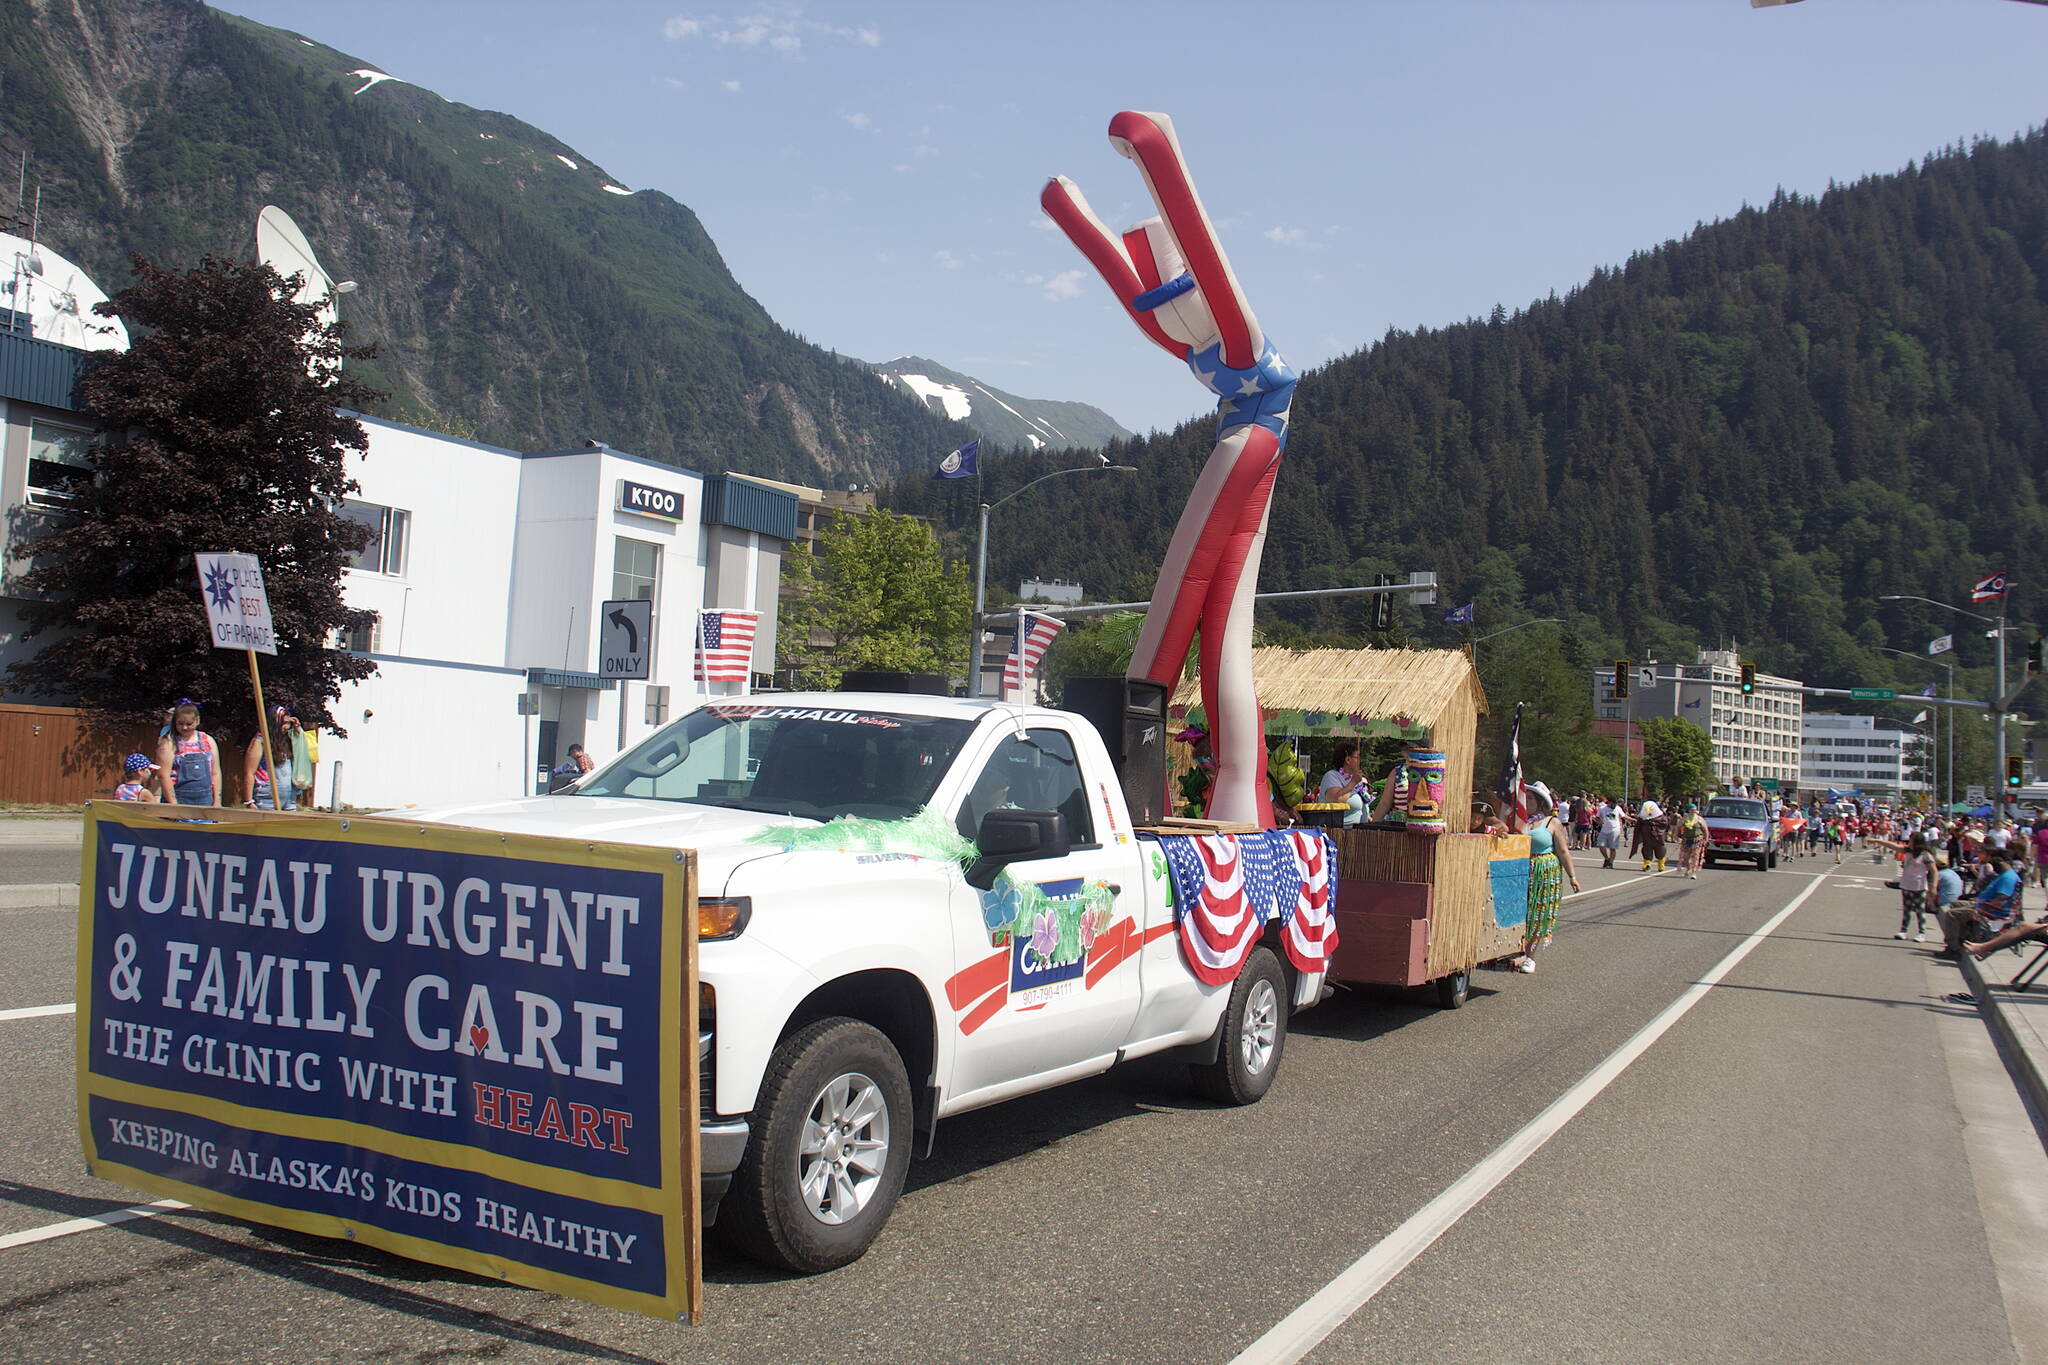 A towering inflatable Uncle Sam “waves” to the crowd from the Hawaiian-themed Juneau Urgent Care float that was won the Best of Parade award in this year’s downtown July 4 parade. (Mark Sabbatini / Juneau Empire)